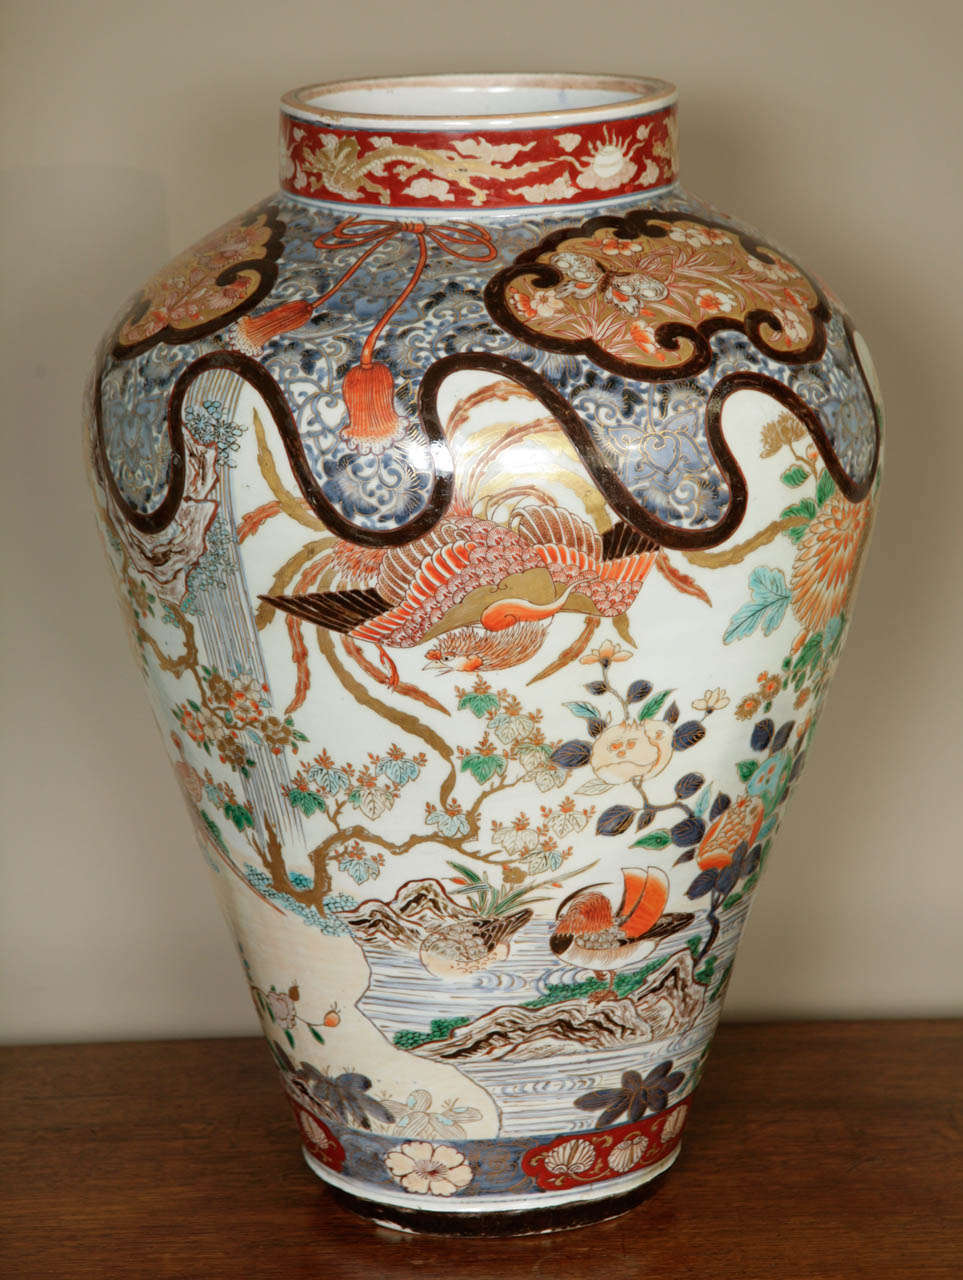 A spectacular and huge early 18th century Japanese Imari vase, circa 1700 showing a plethora of exotic birds such as ducks, pheasants, phoenixes and birds of paradise. All set in a landscape with waterfalls, ponds and rocks. Decorated throughout